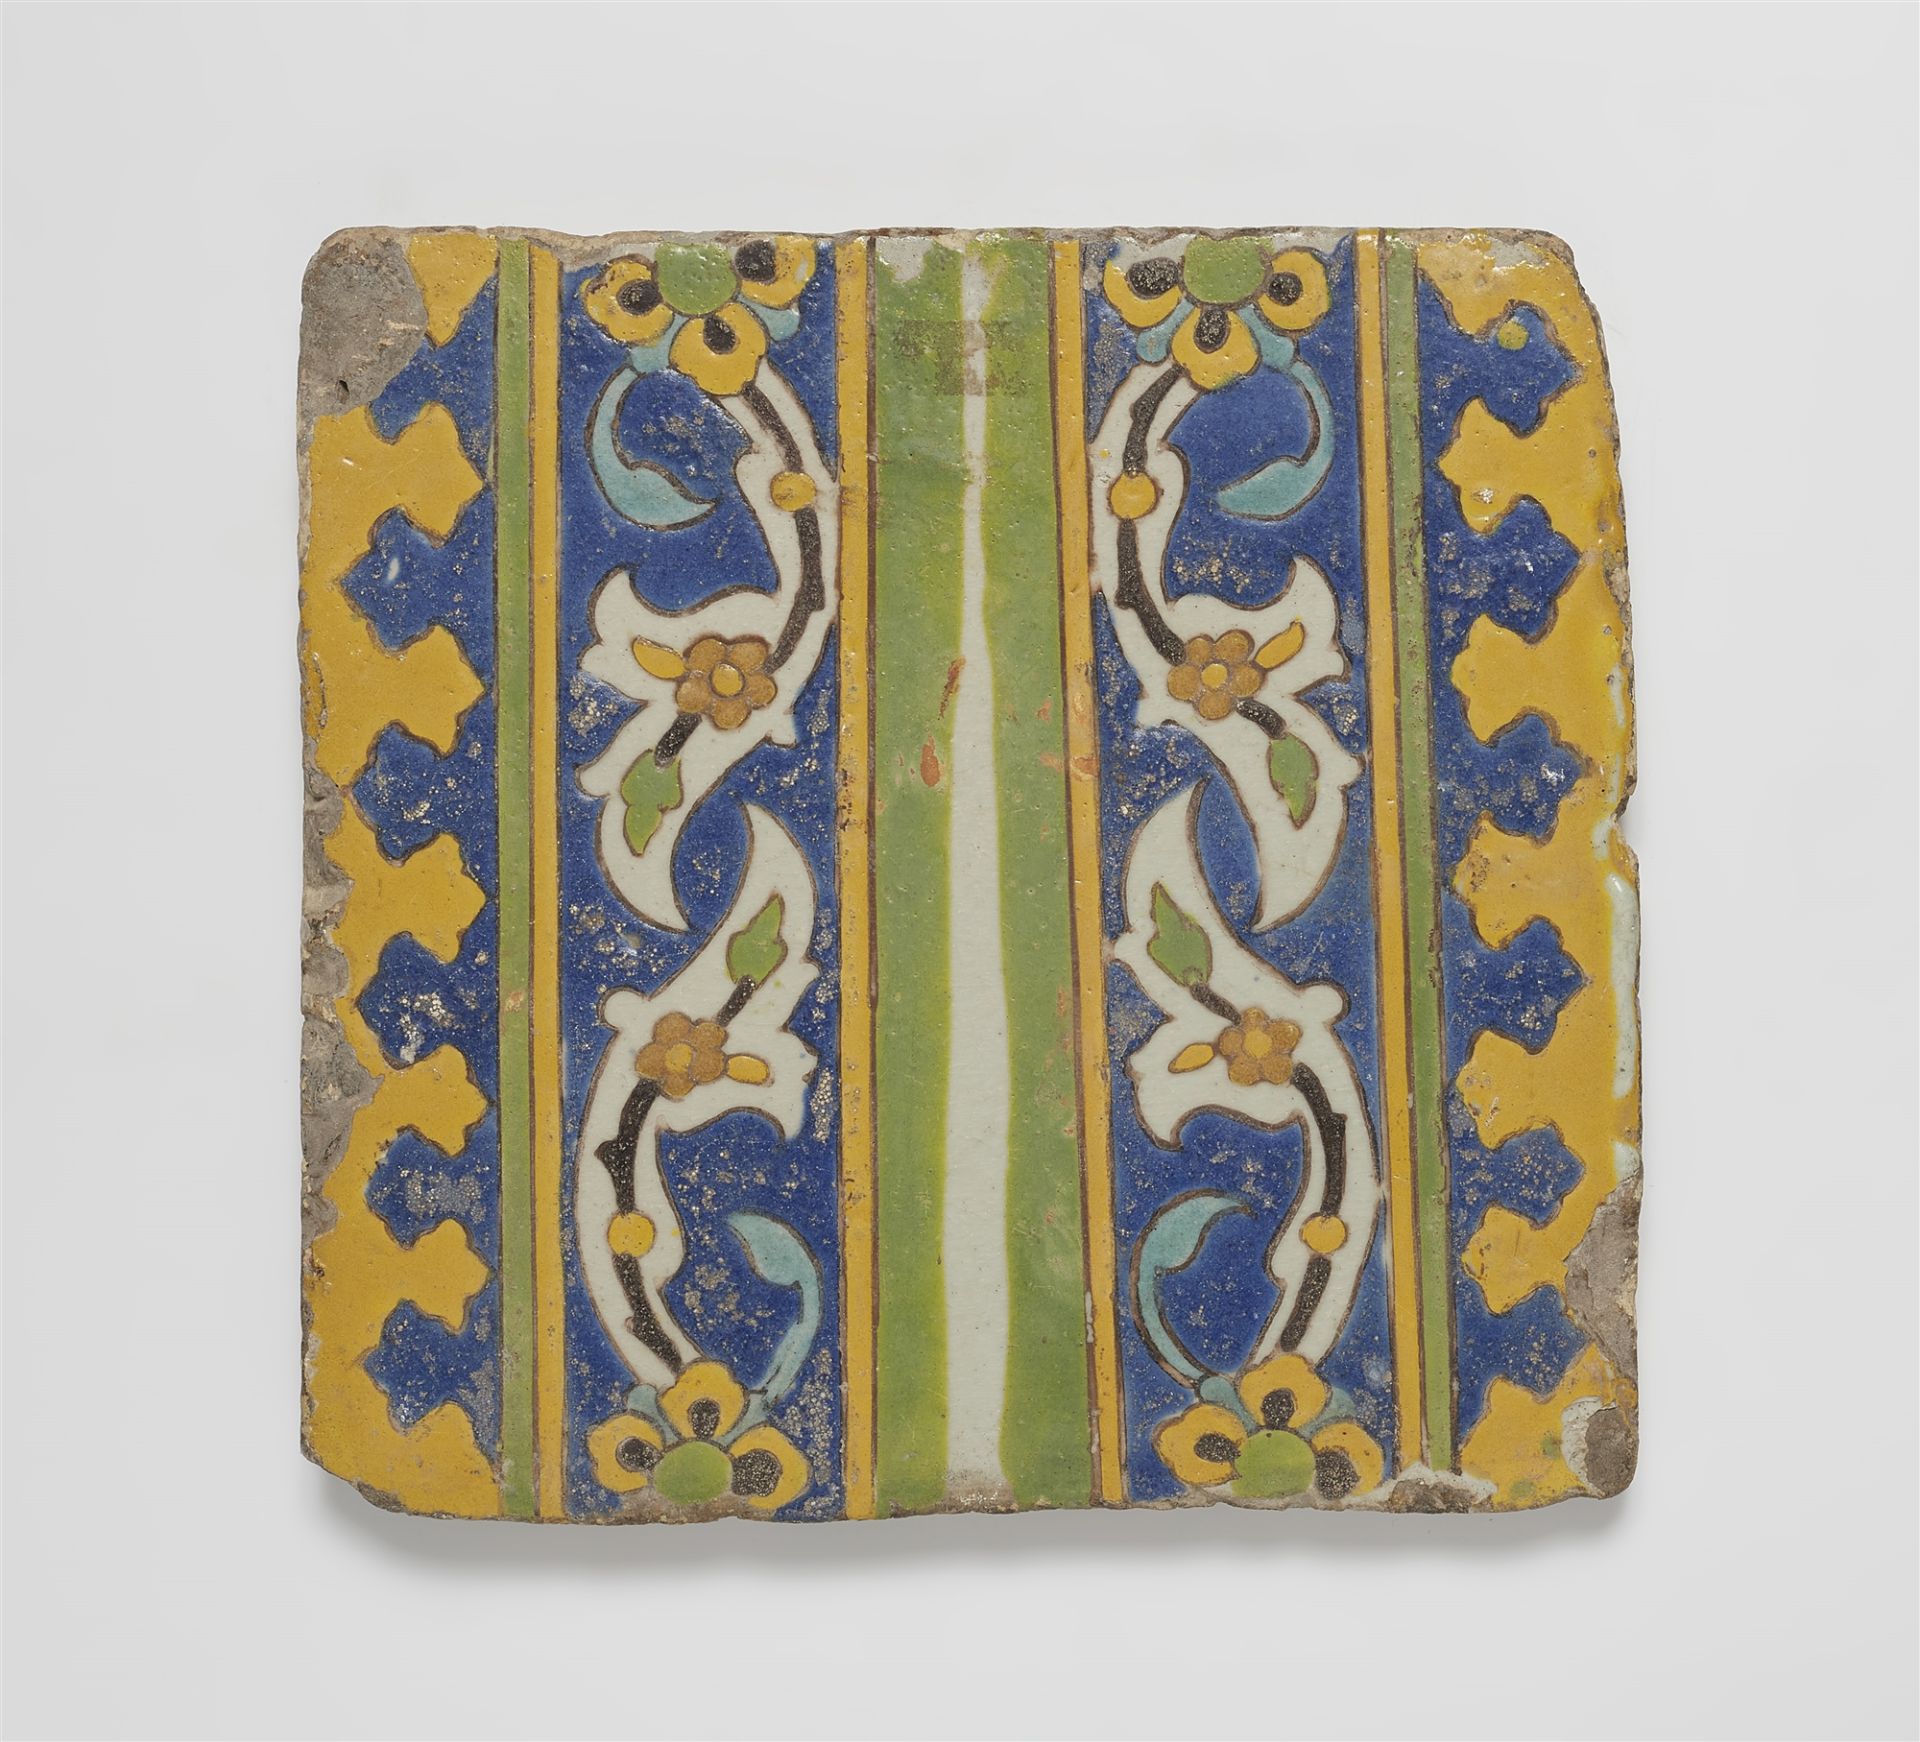 A Safavid tile with flowering tendril pattern